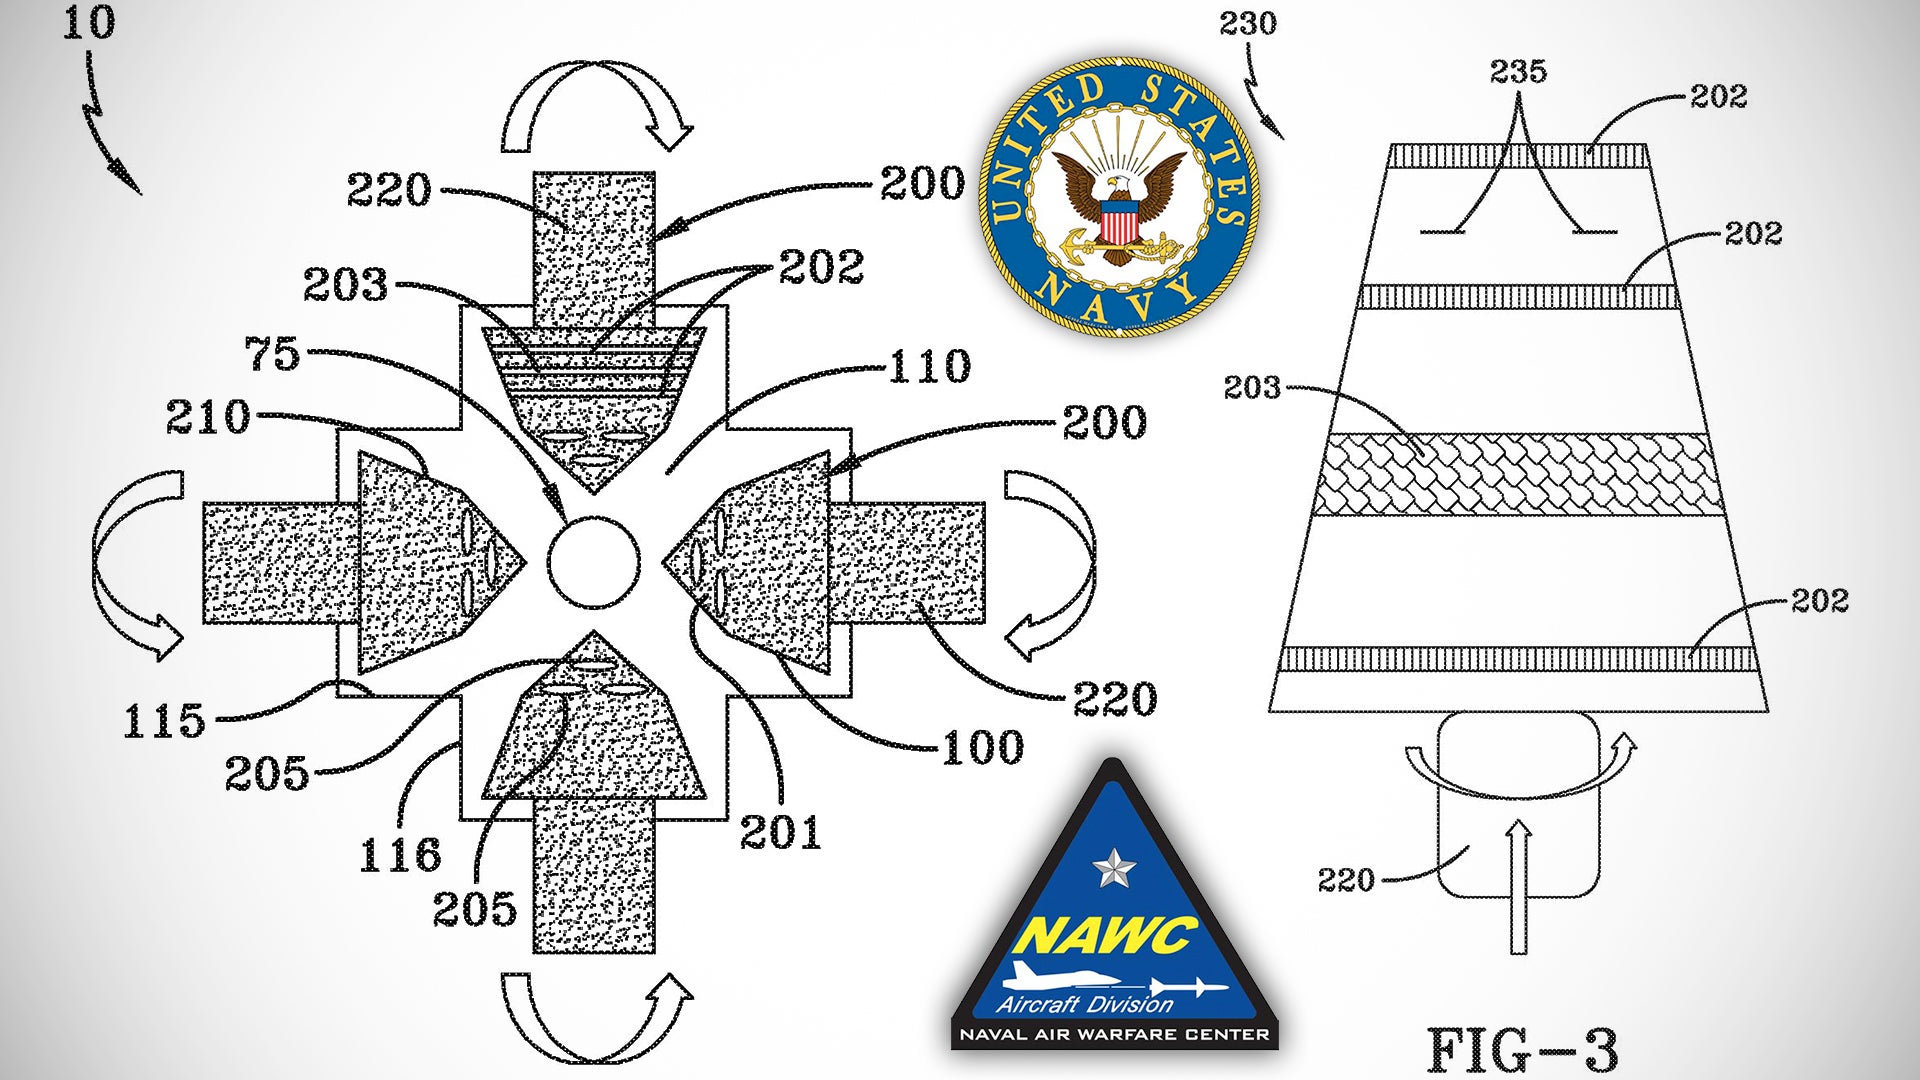 Scientist Behind The Navy’s “UFO Patents” Has Now Filed One For A Compact Fusion Reactor